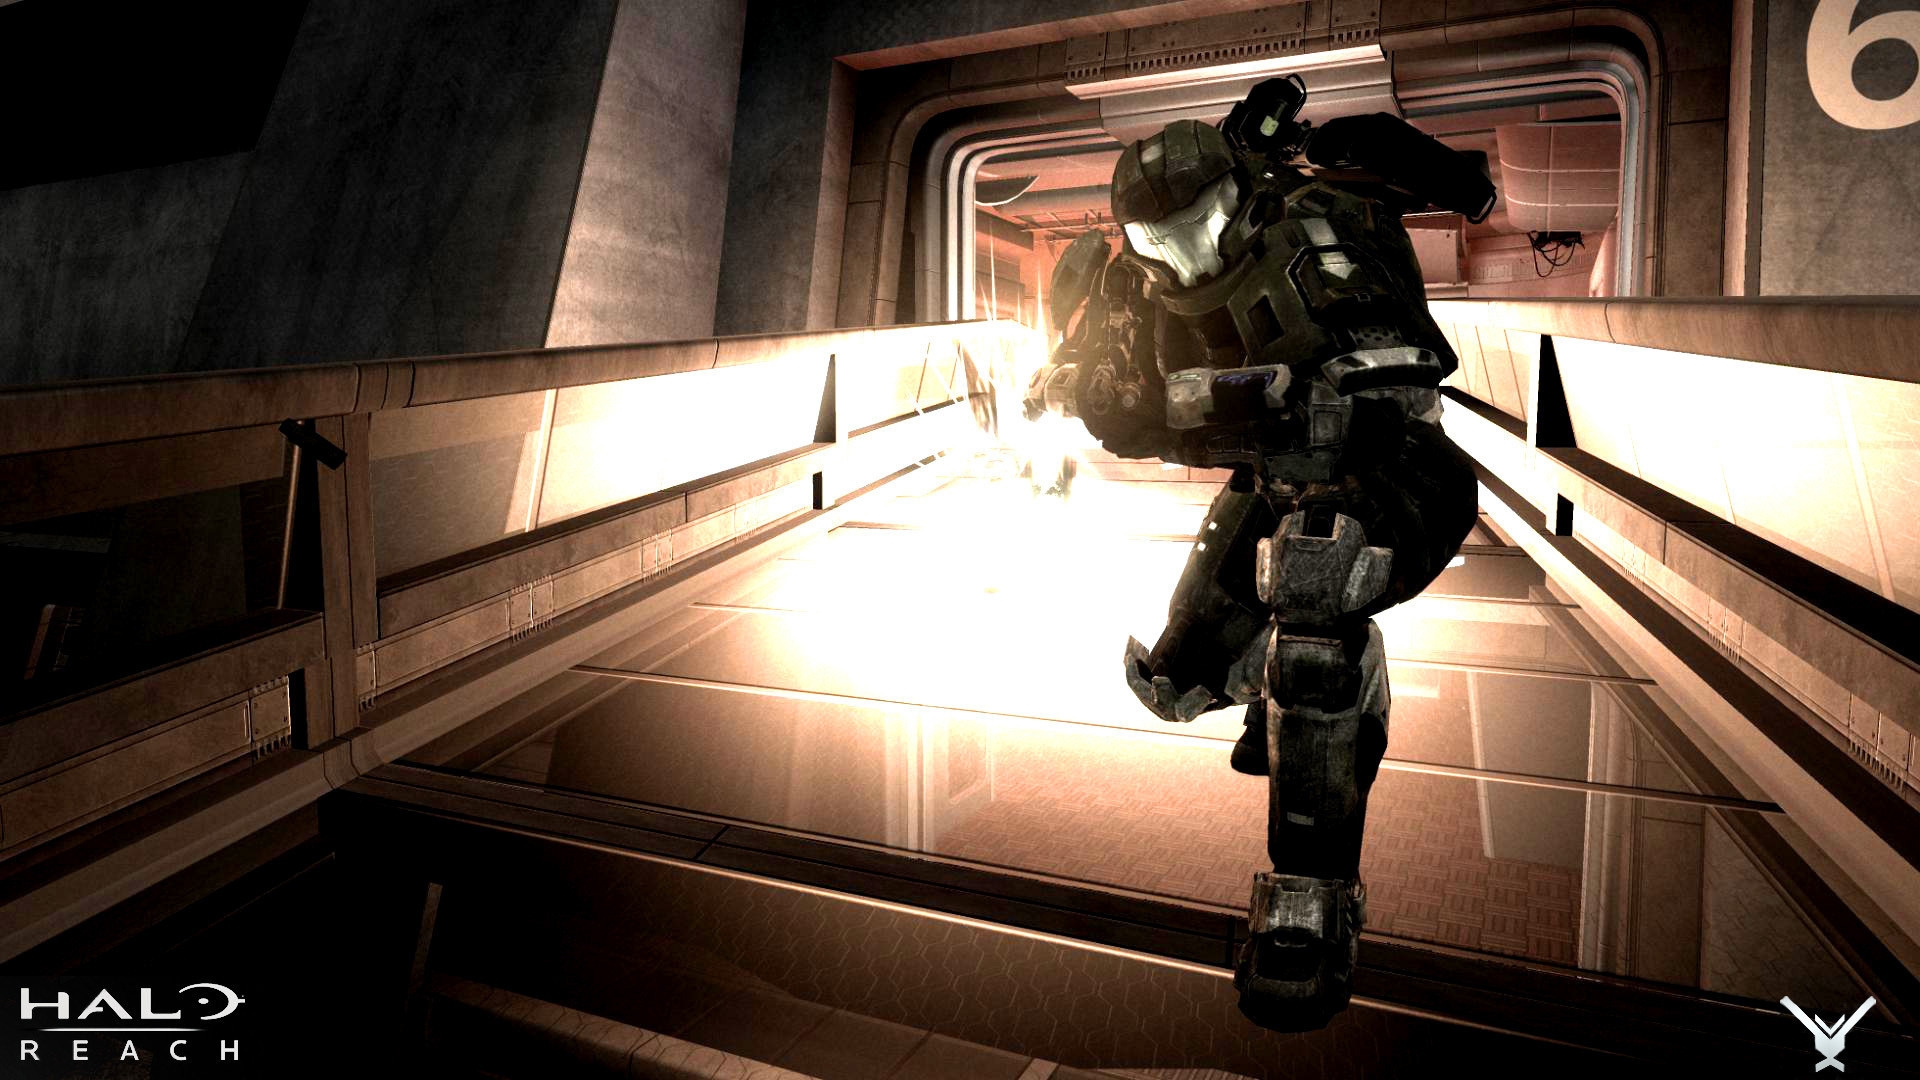 Halo Reach Character for 1920 x 1080 HDTV 1080p resolution